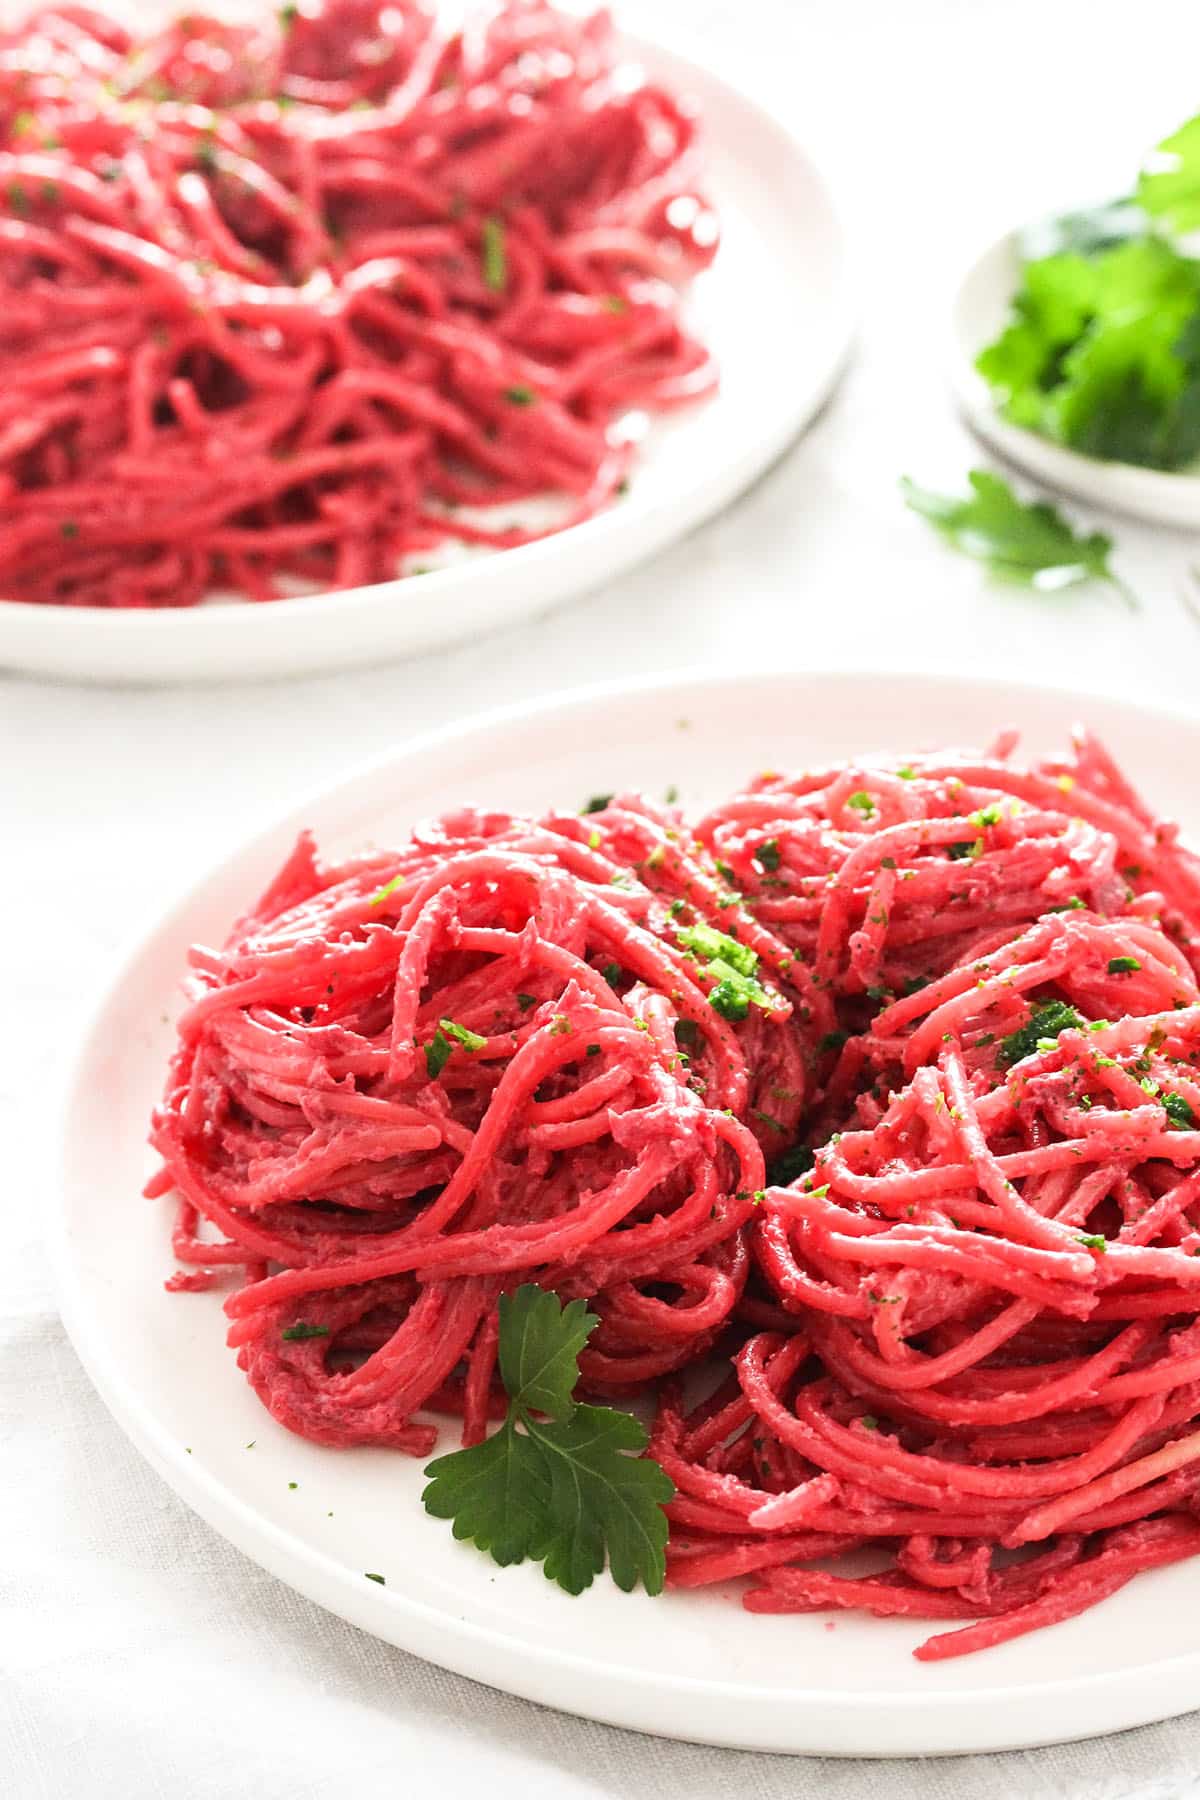 two plates holding spaghetti coated with pink beetroot sauce.